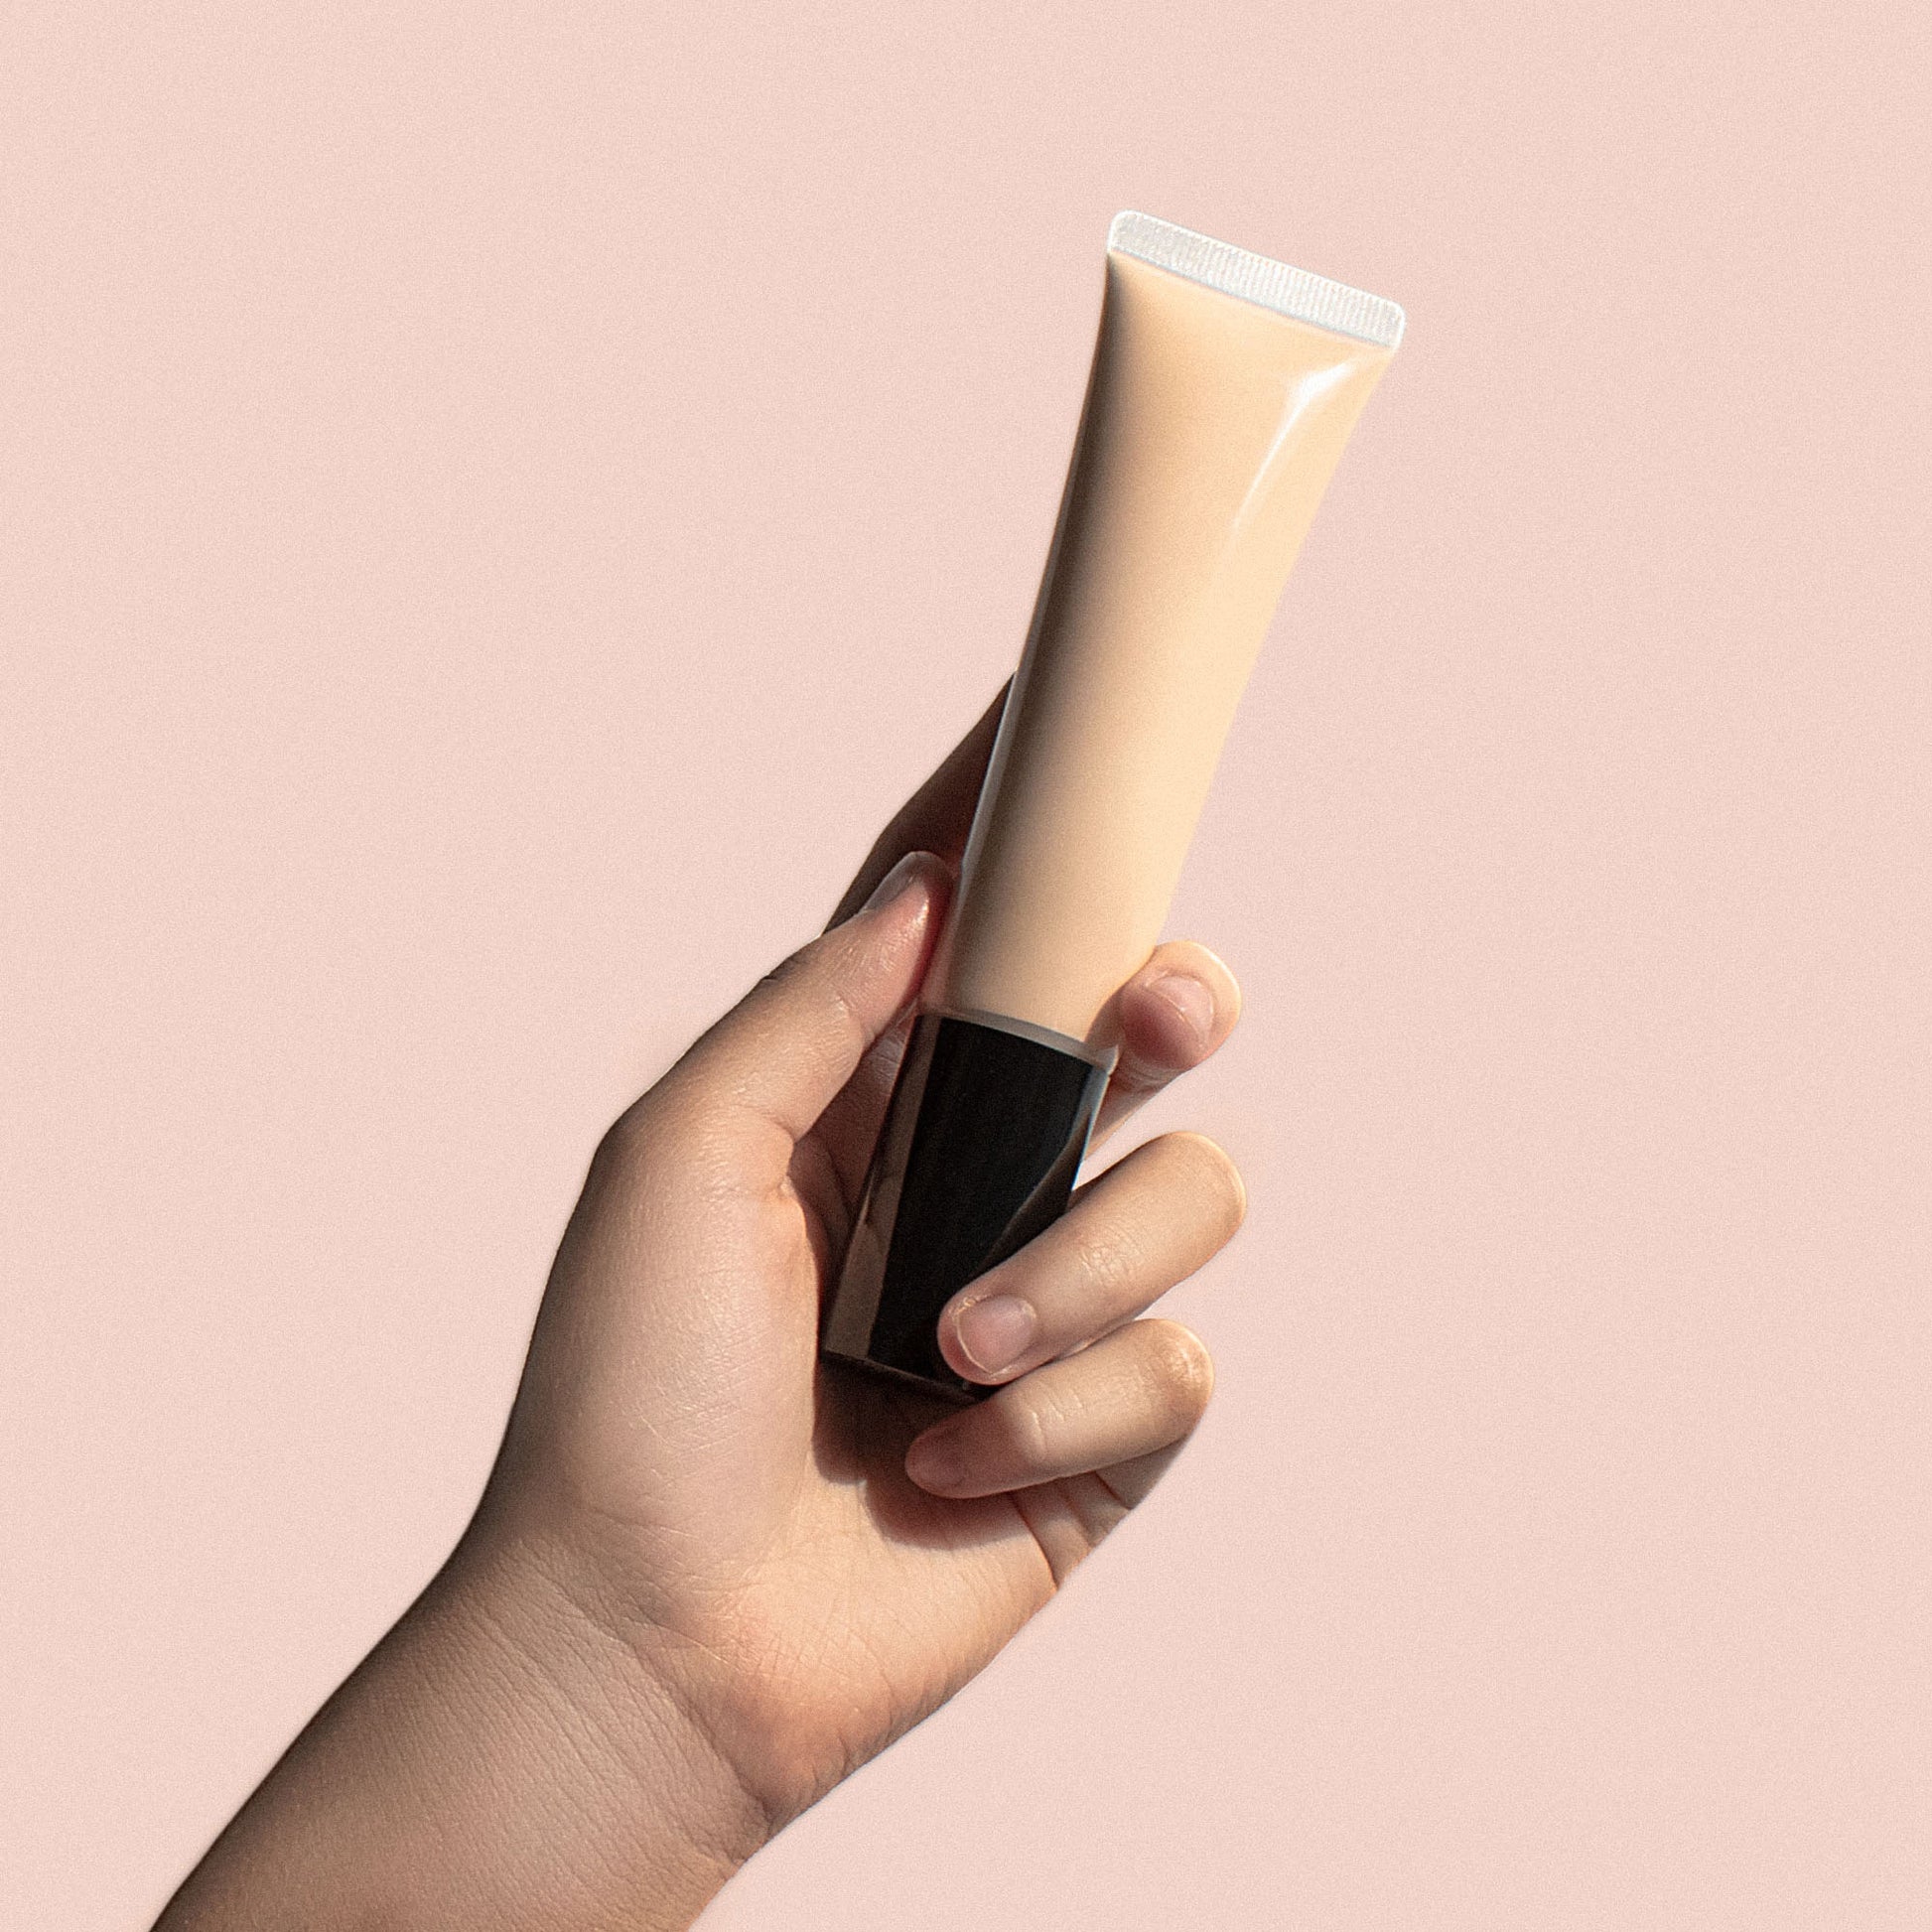 Benefit from comprehensive sun protection and an elegant, pearlescent finish with Cruisin Organics Pearly BB Cream. This top-performing cream delivers both coverage and SPF for optimal results.